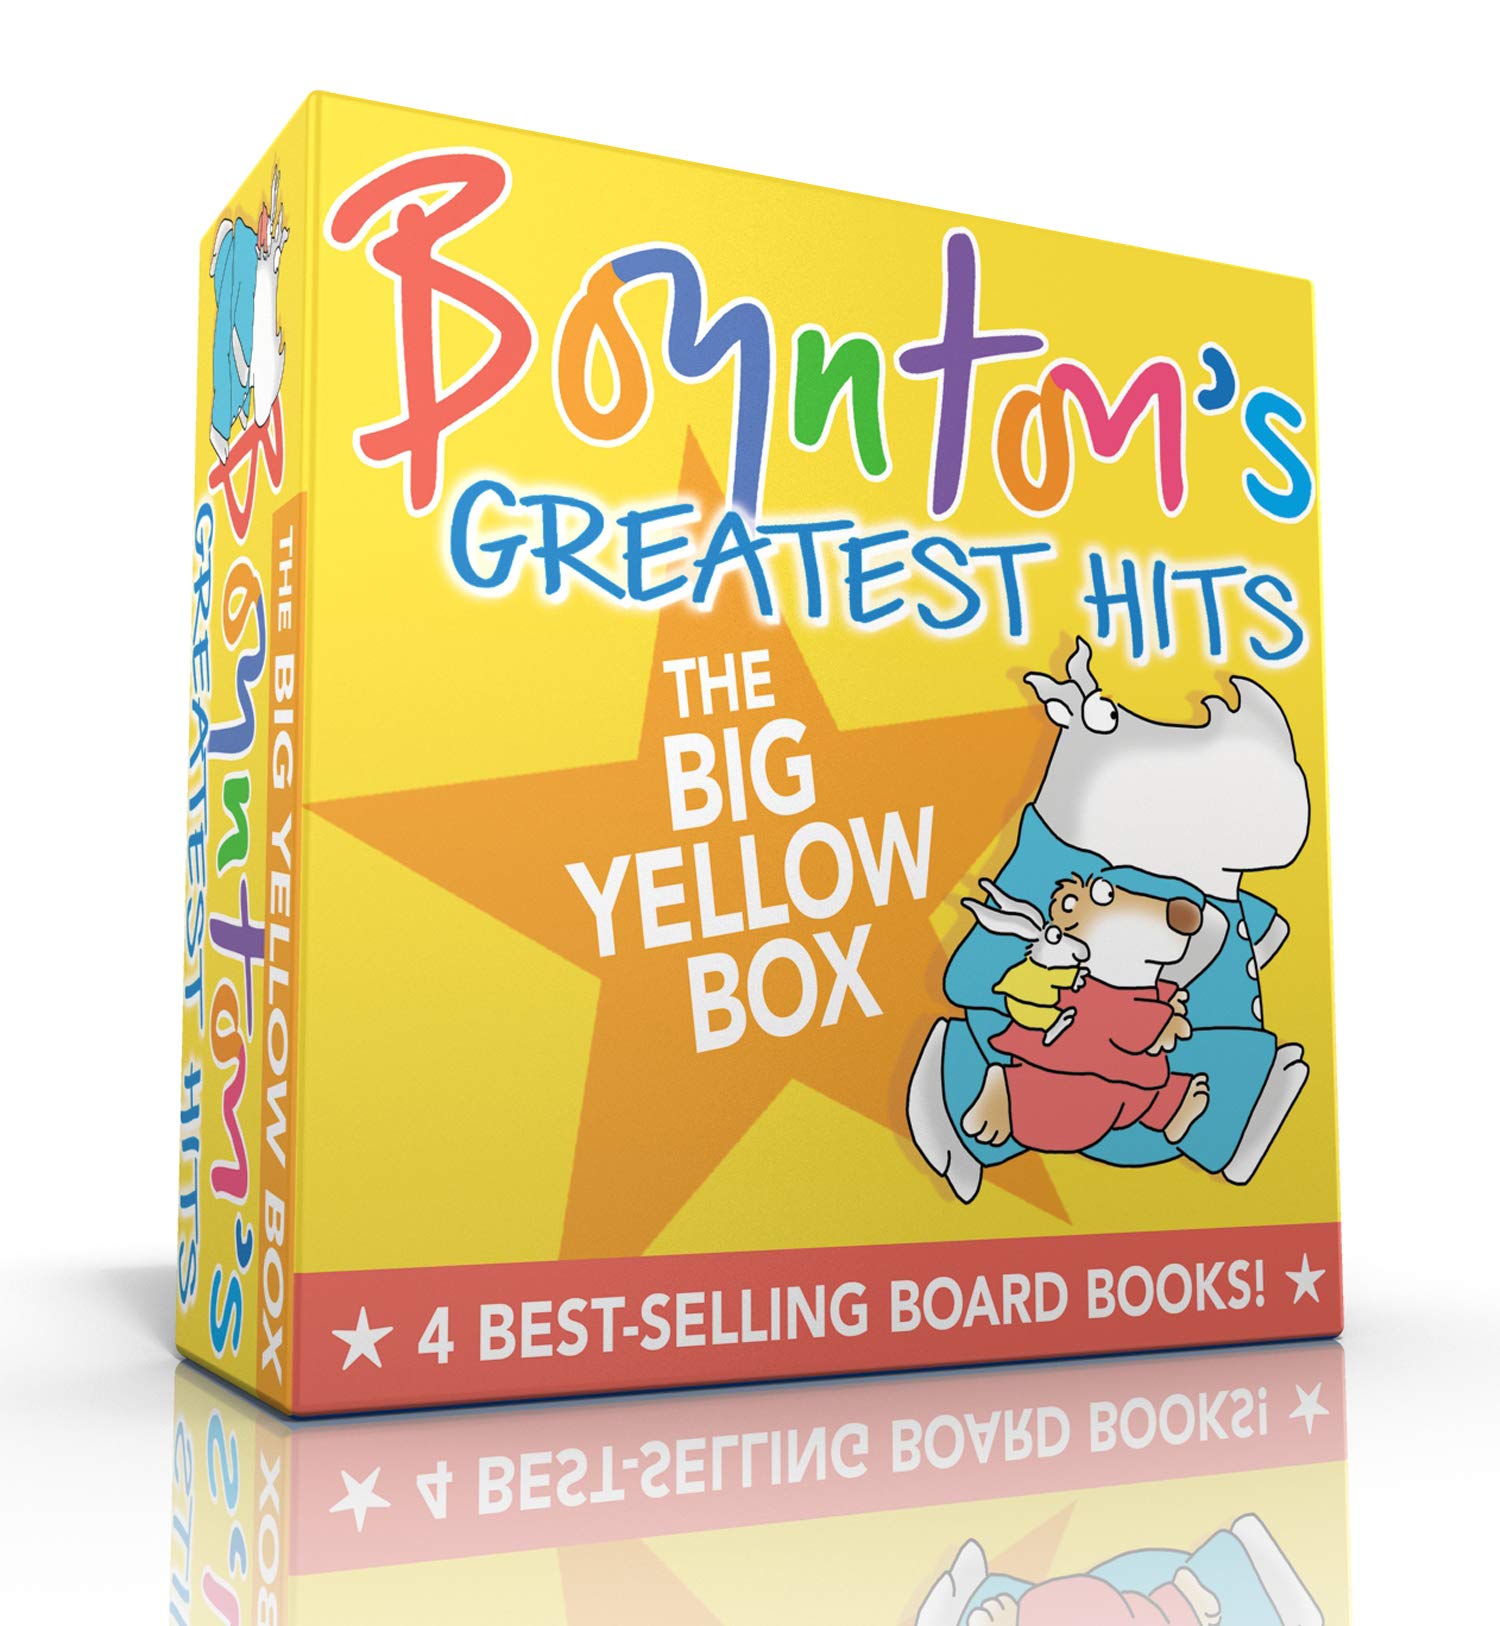 Boynton's Greatest Hits the Big Yellow Box: The Going-To-Bed Book; Horns to Toes; Opposites; But Not the Hippopotamus (Boxed Set)